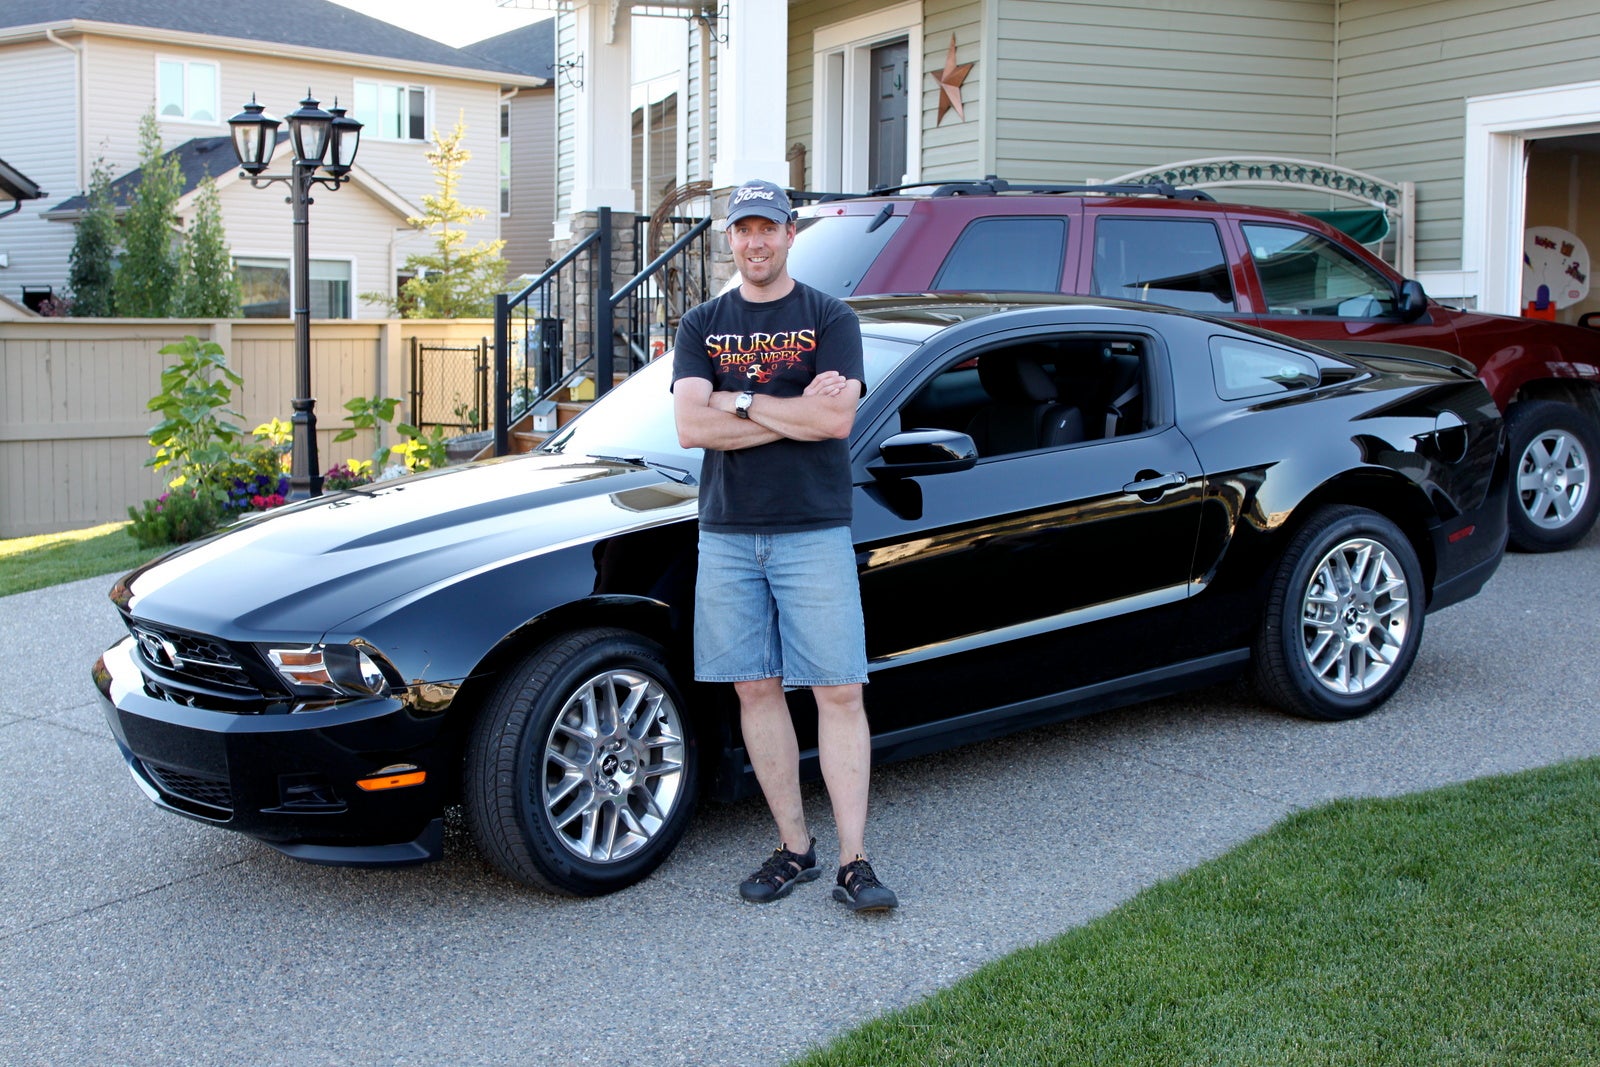 2012 Ford mustang v6 premium coupe review #2